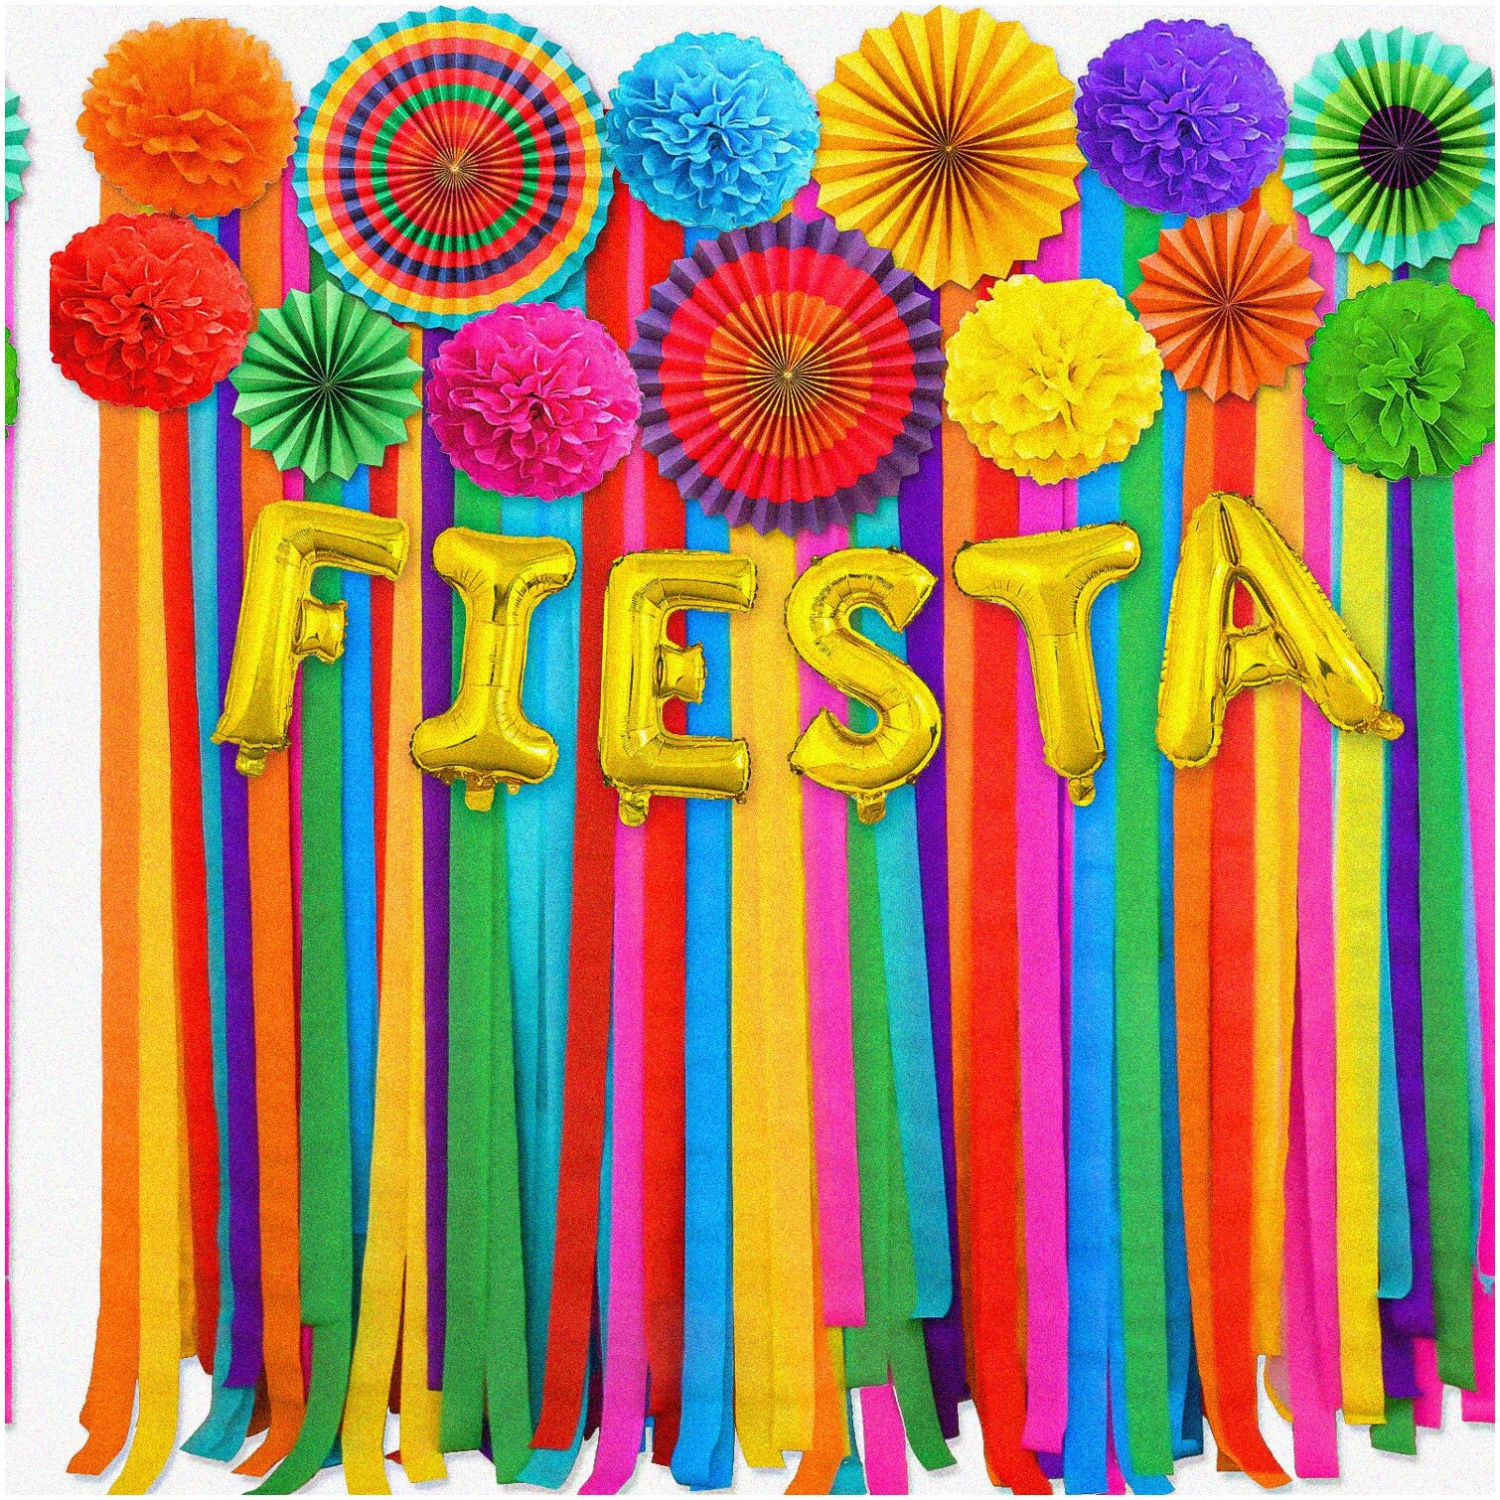 Fiesta Fiesta: 32pcs Mexican Party Decorations Kit - Vibrant Crepe Paper Streamers, Backdrop, Paper Fans, Pom Poms, Flowers, Taco Decor - Celebrate Day of the Dead & Cinco de Mayo